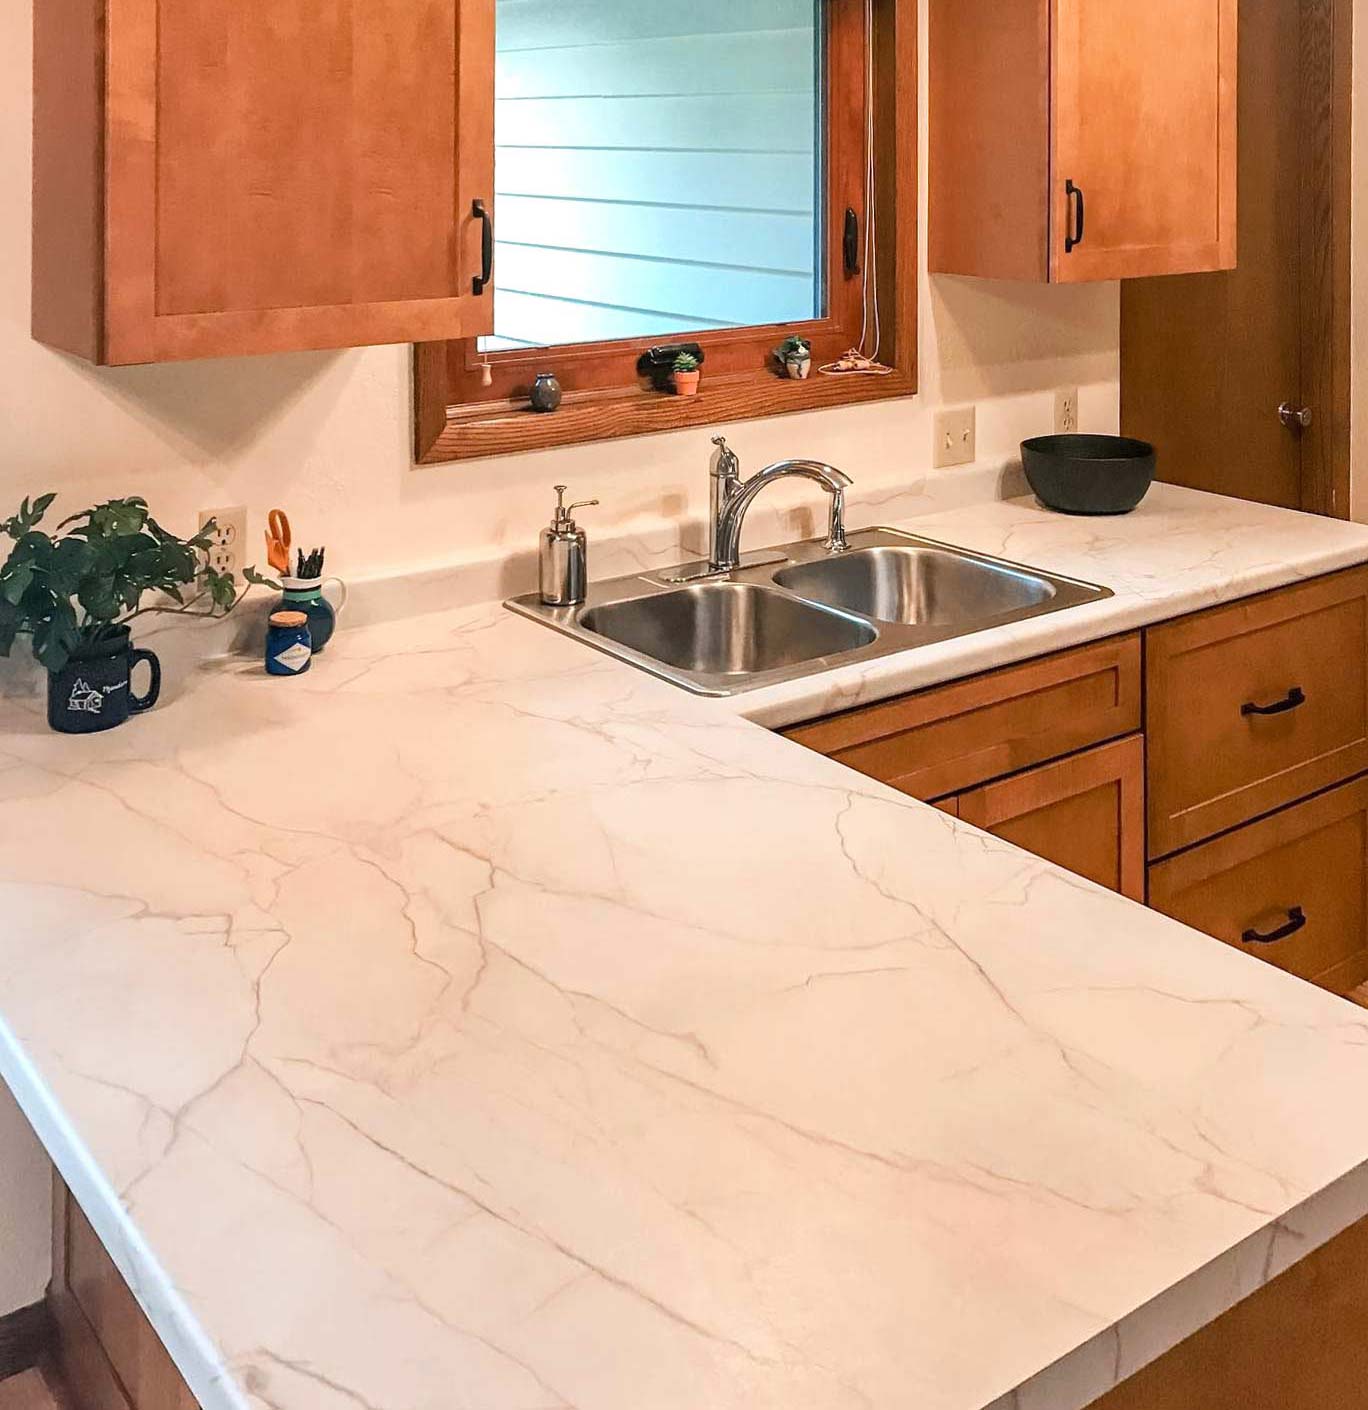 Kitchen with light marble laminate countertop